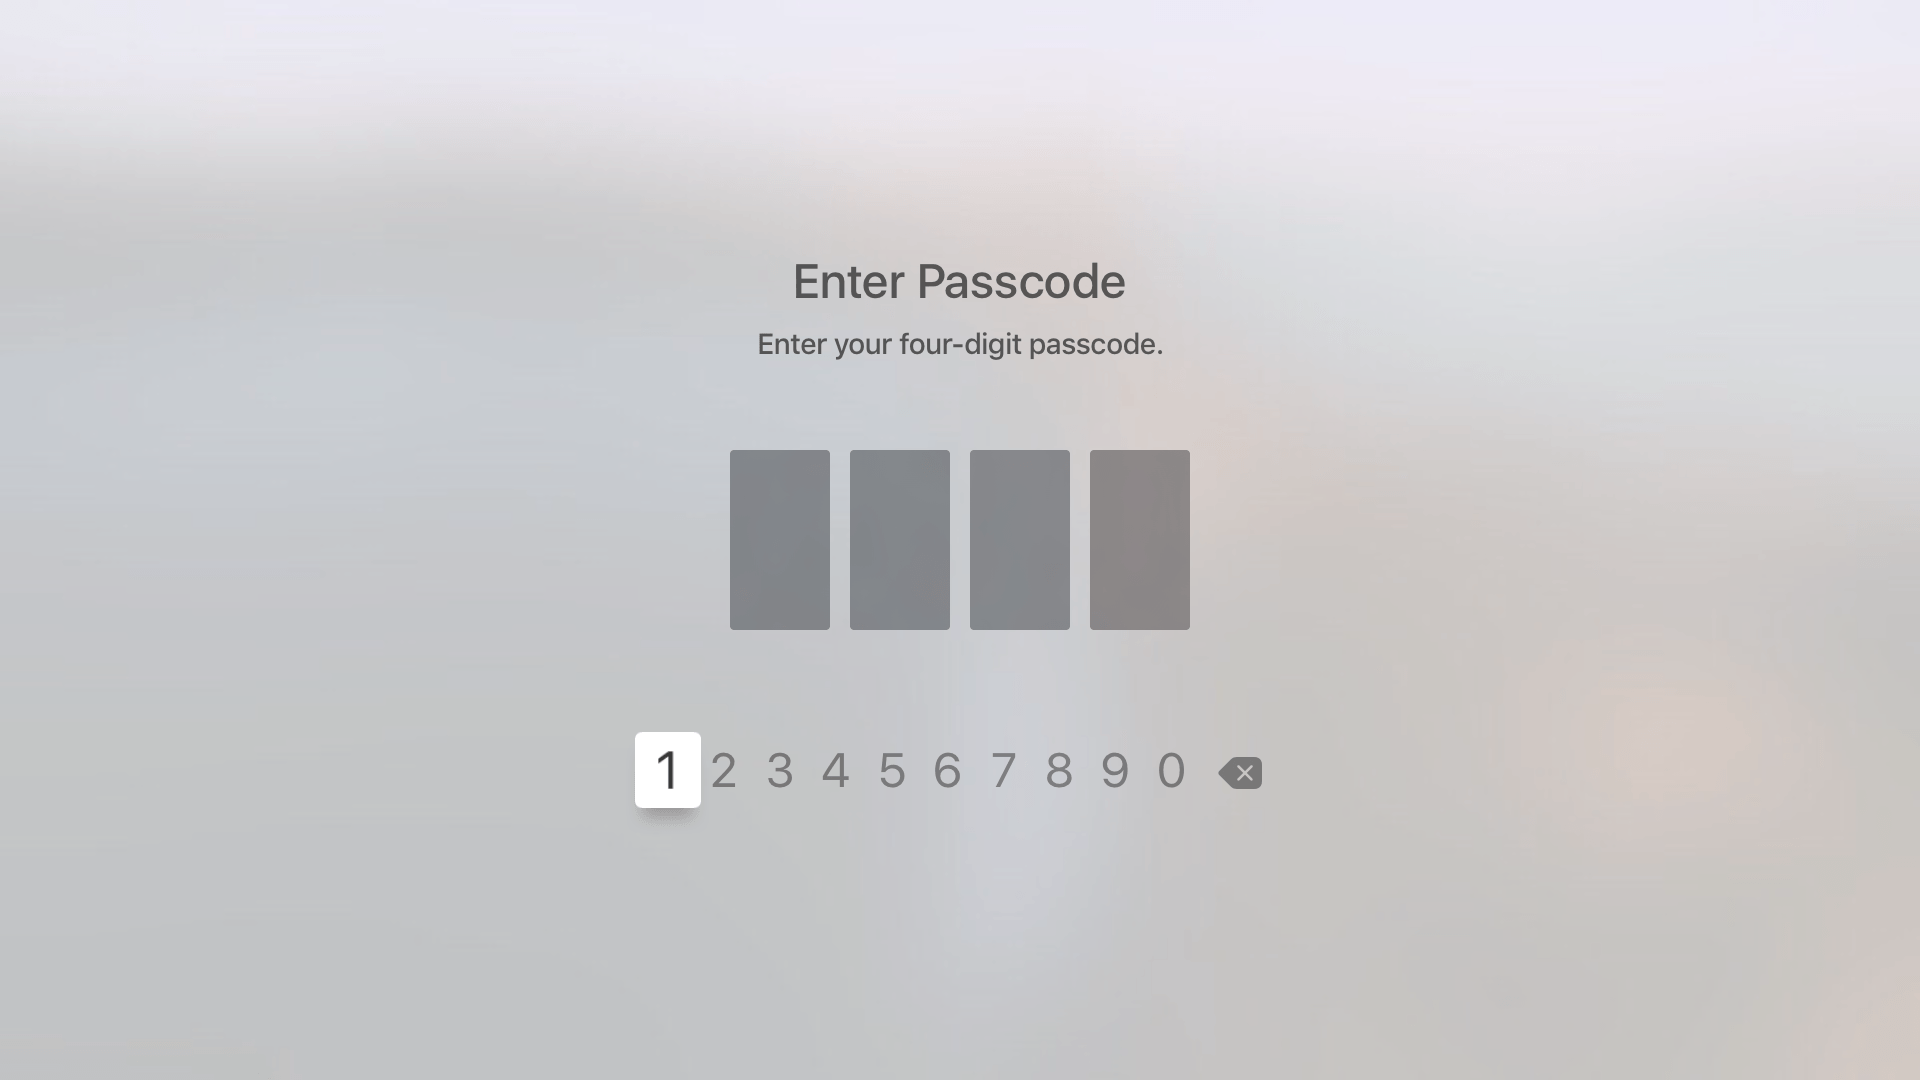 How To Use A 4 Digit Passcode For Purchases On Apple TV